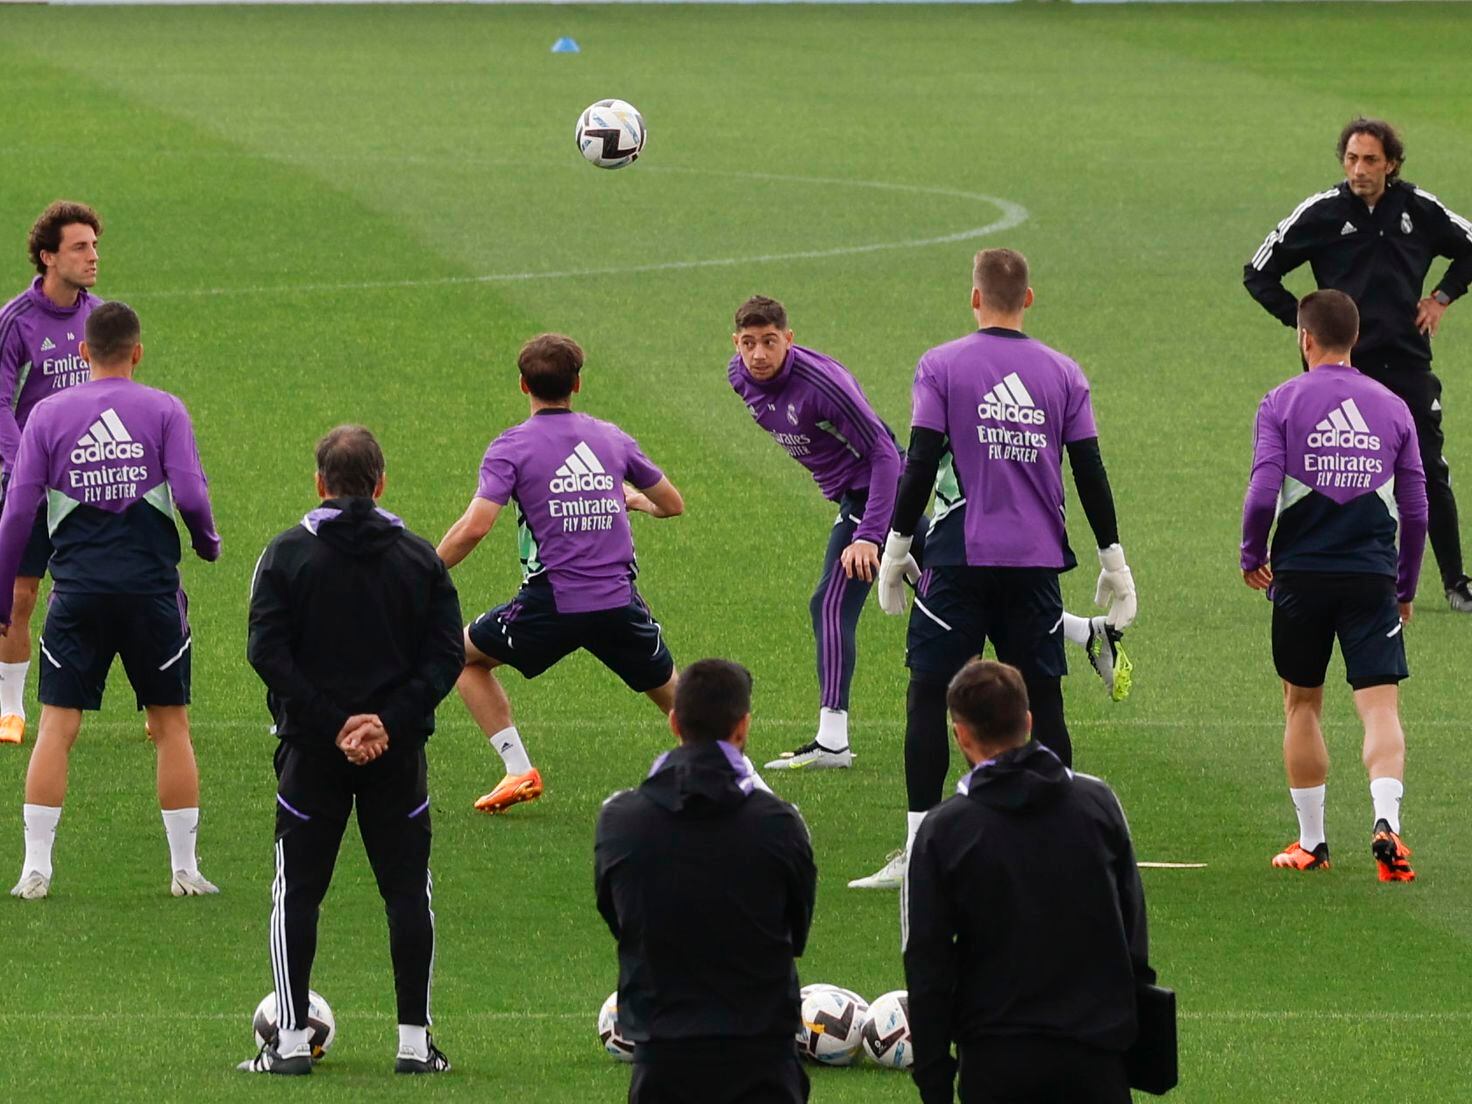 The Real Madrid players are flying thanks to Ancelotti and Pintus